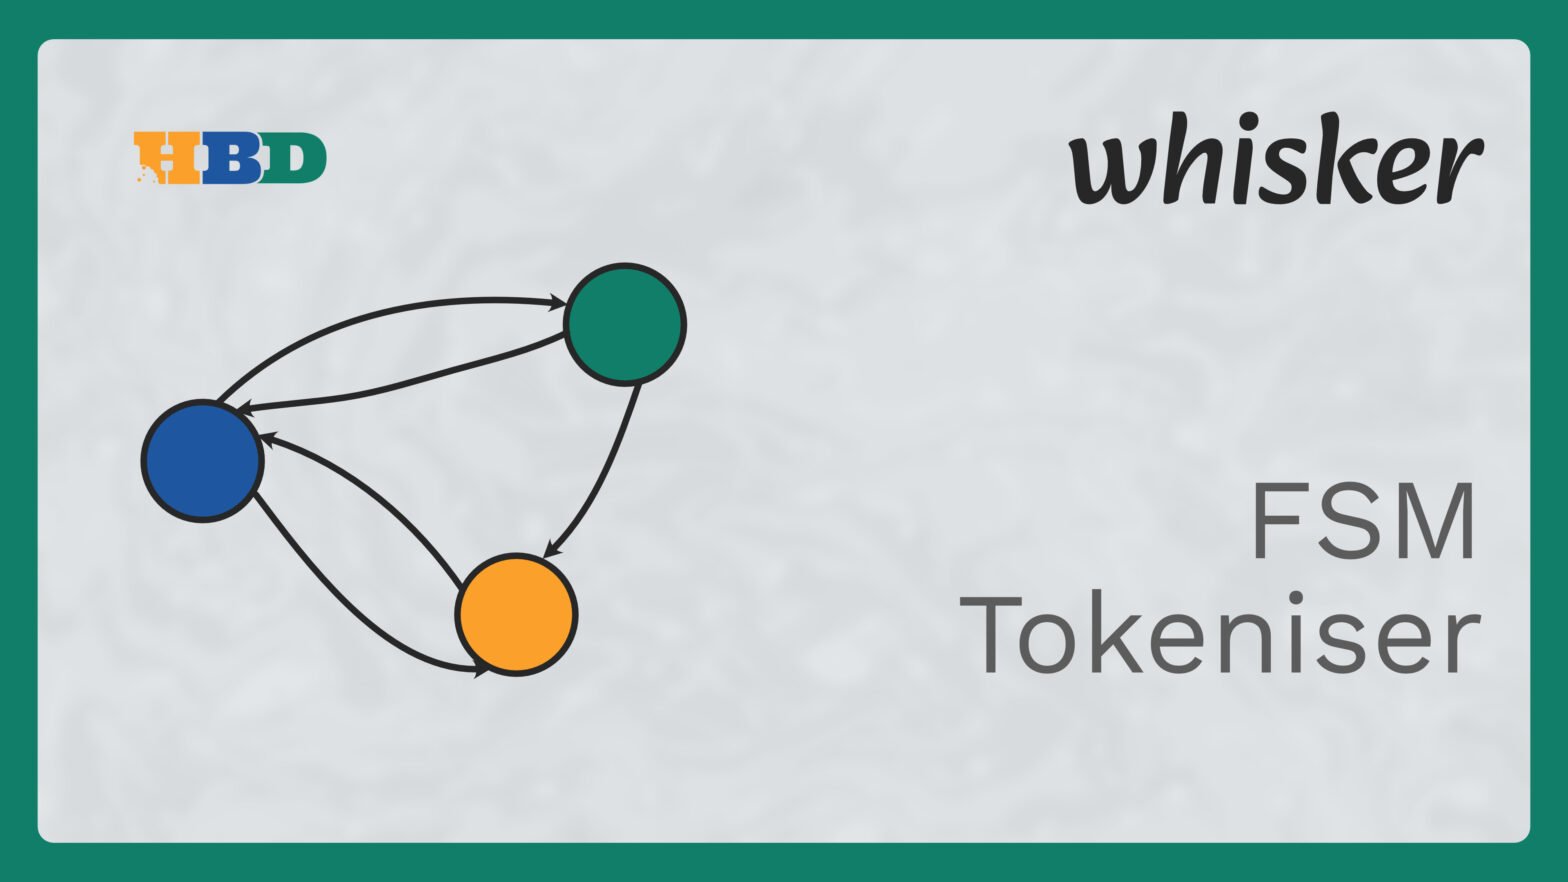 Thumbnail for the tokeniser article for whisker. Illustration shows a finite state machine with three interconnected nodes. Contains the HBD and whisker logos, and the caption: FSM Tokeniser